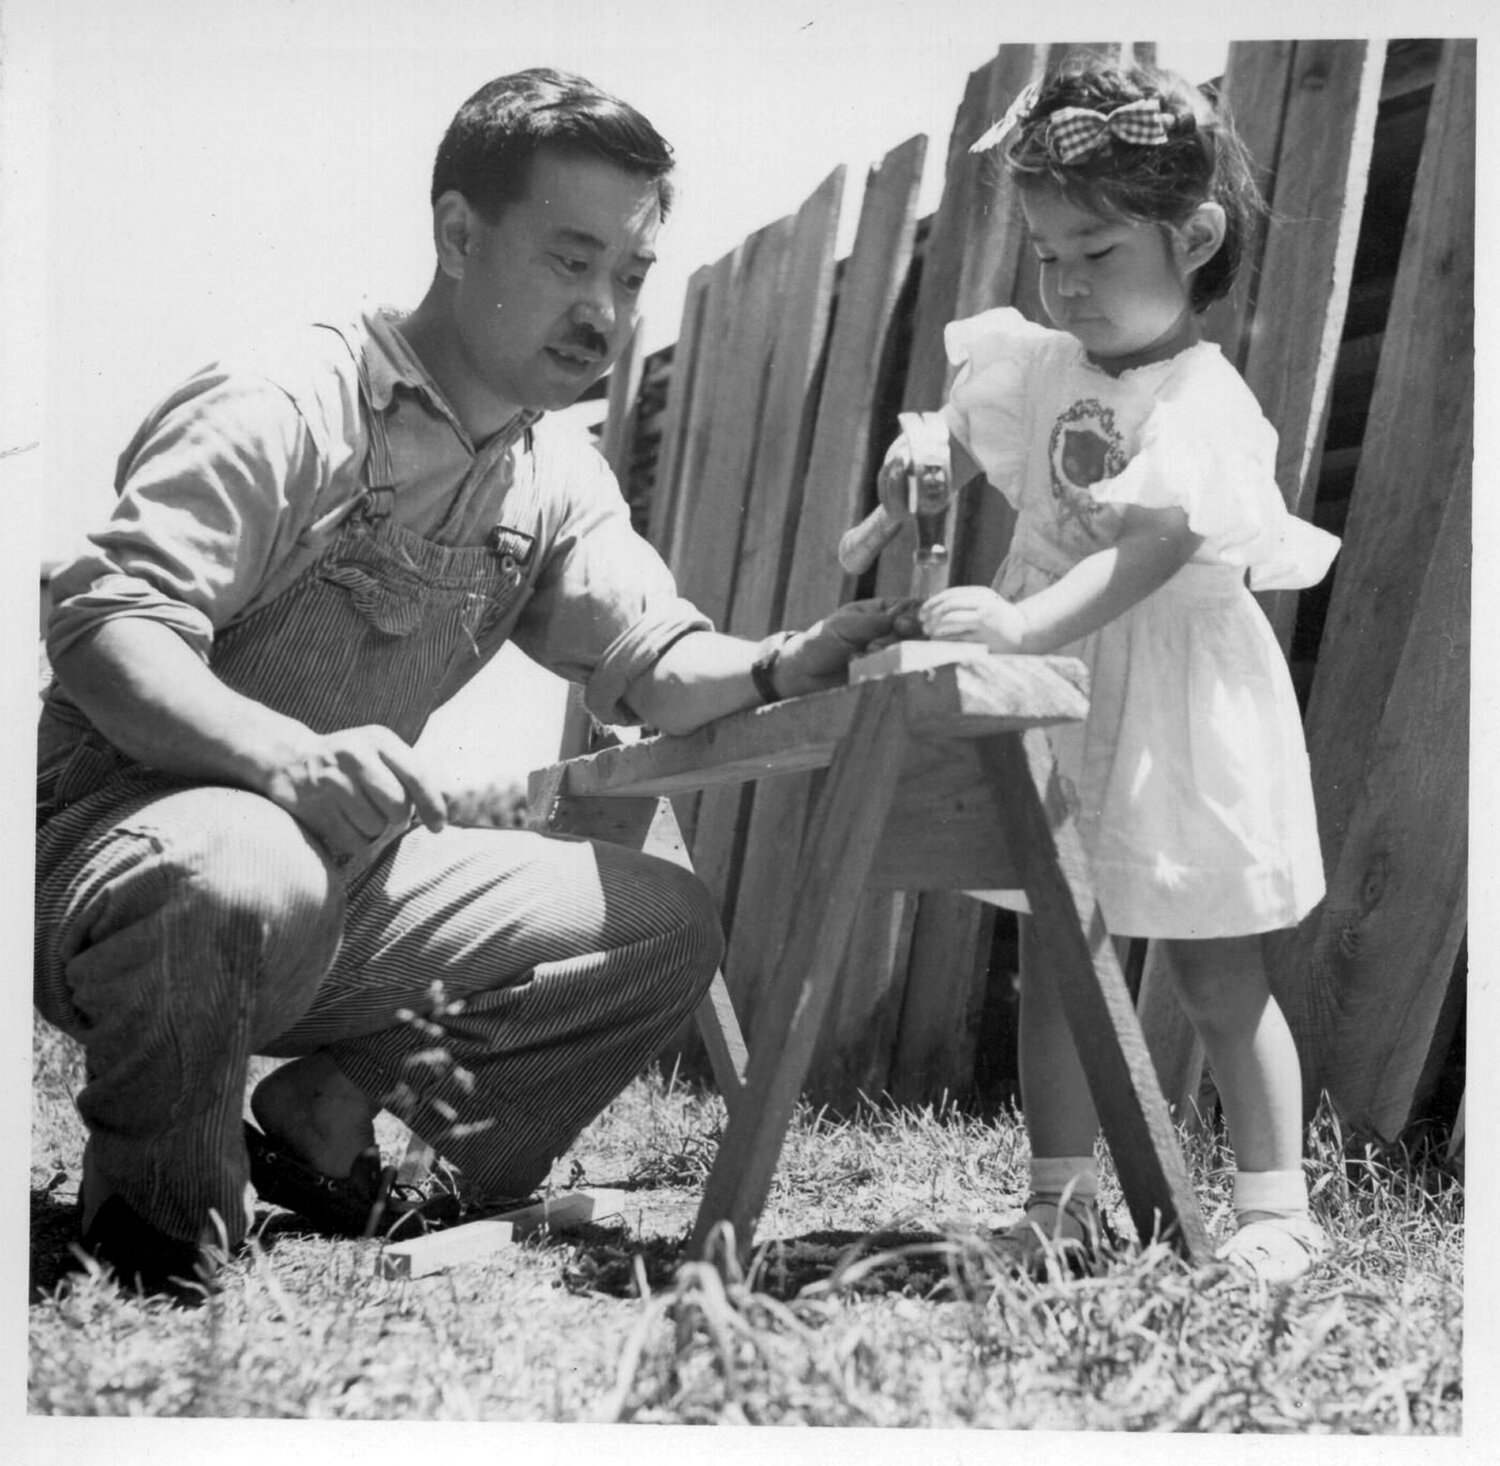 A young Mira Nakashima helps her father, George.